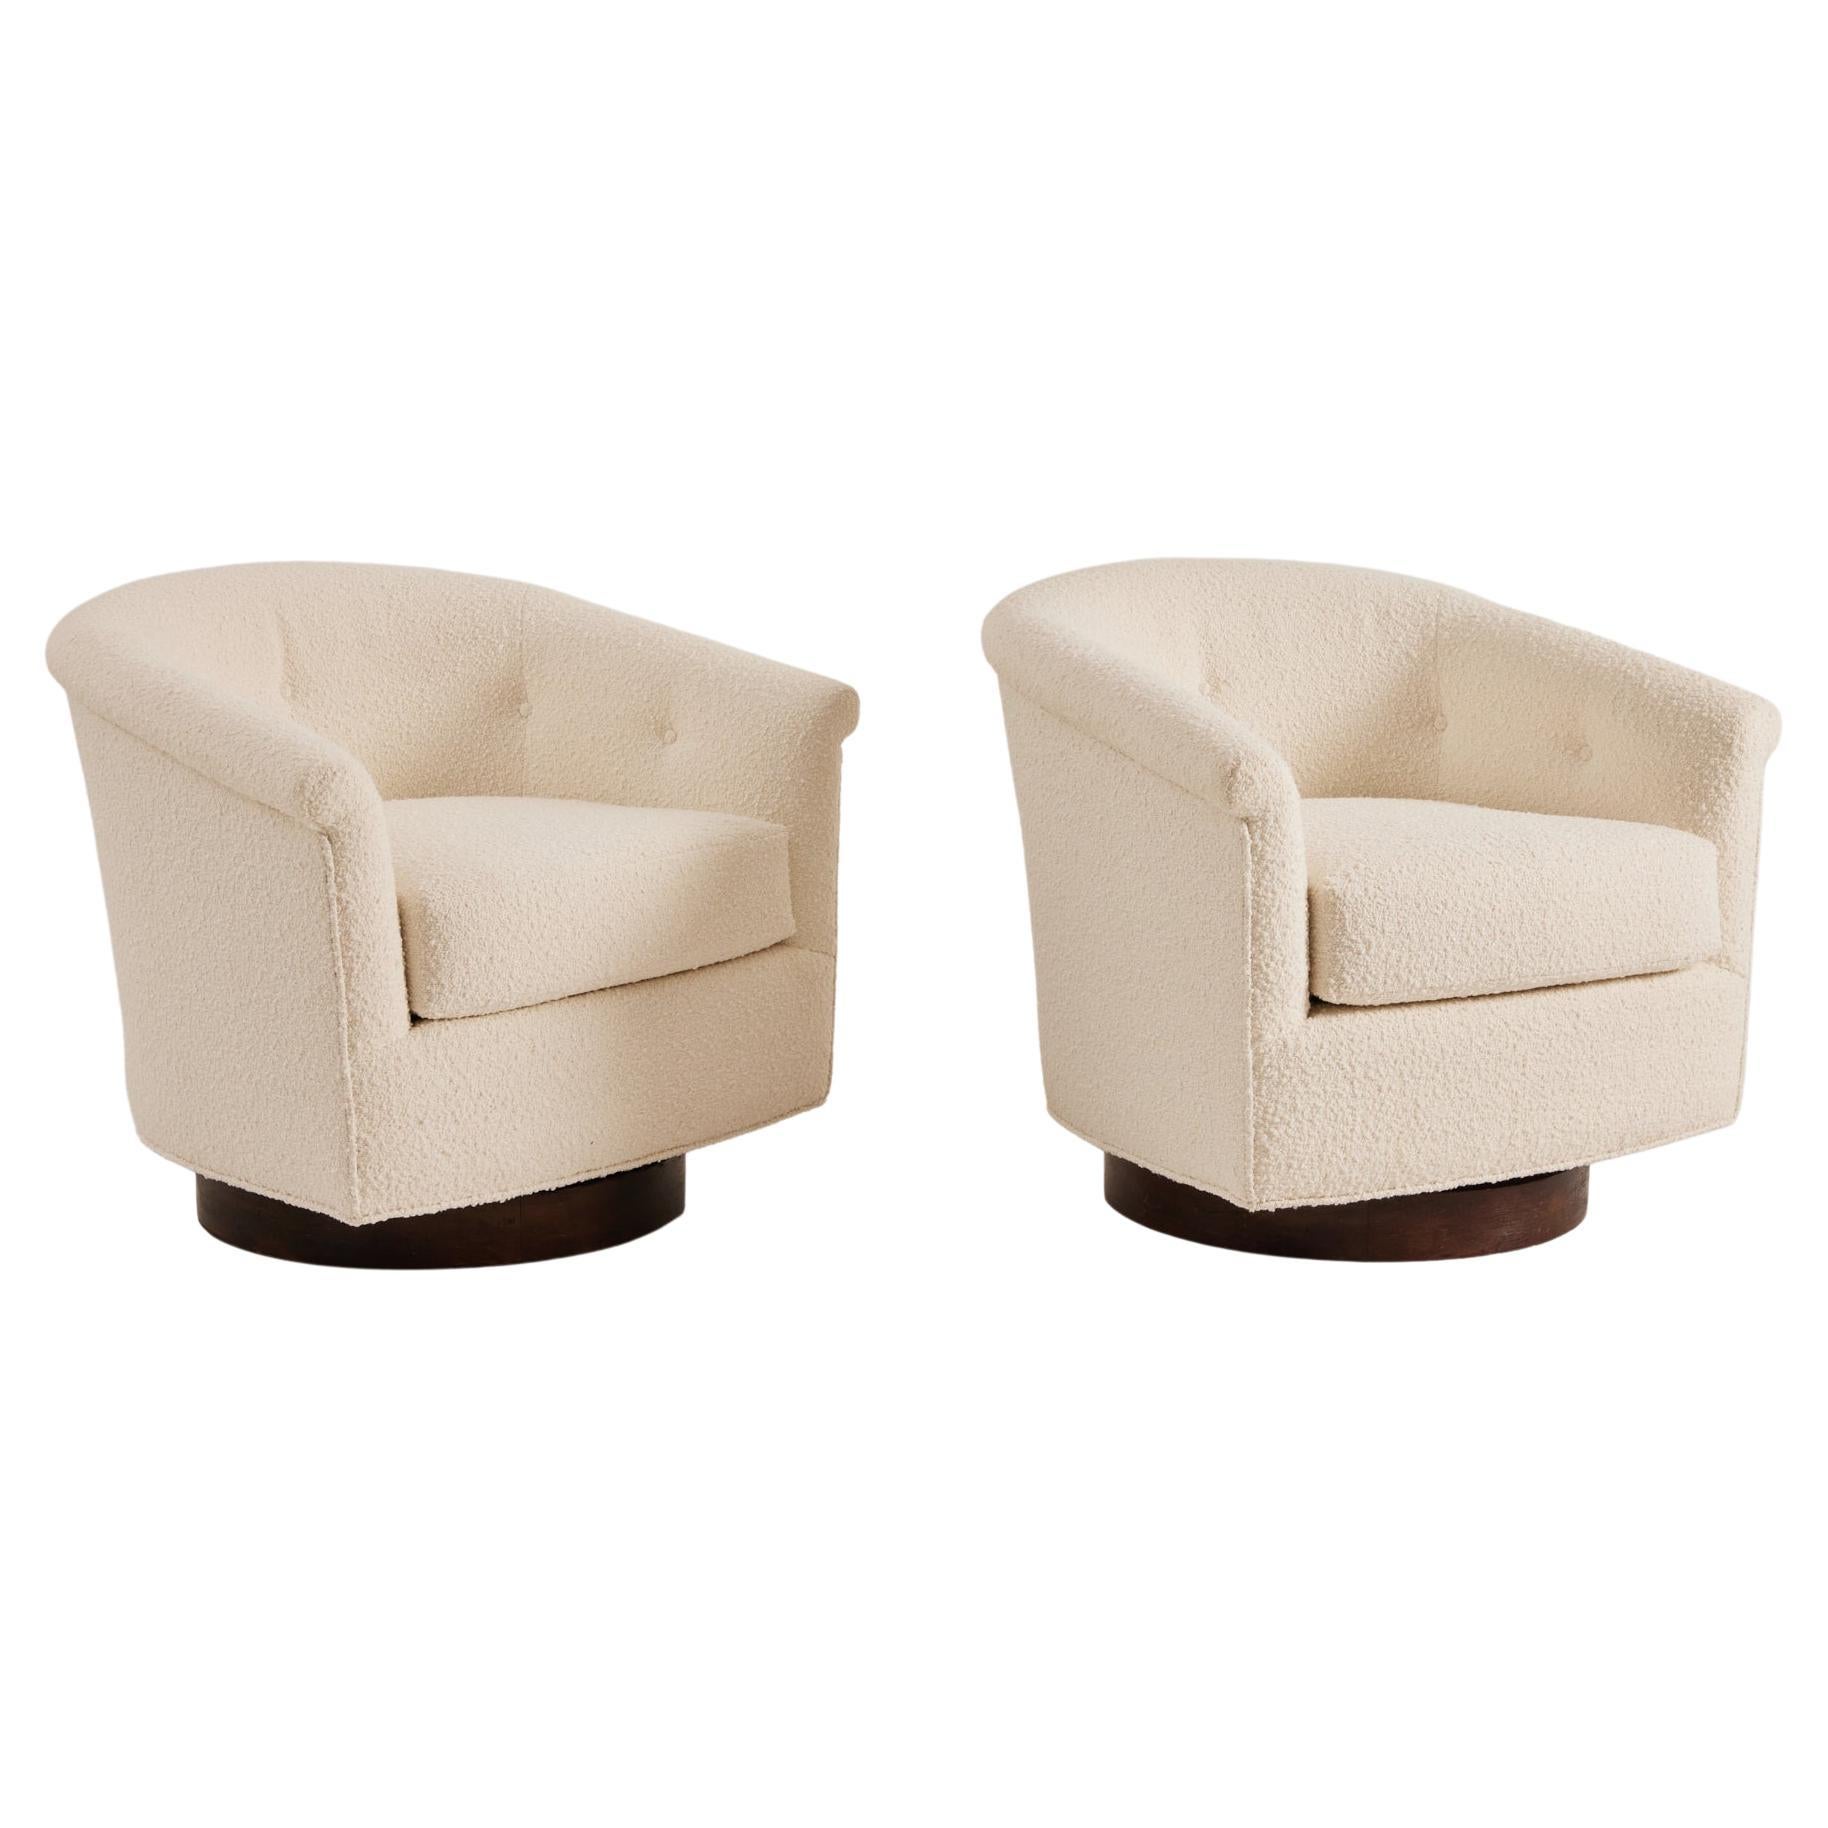 1950s Milo Baughman Attributed Swivel Tub Chairs in Ivory Boucle - Set of 2